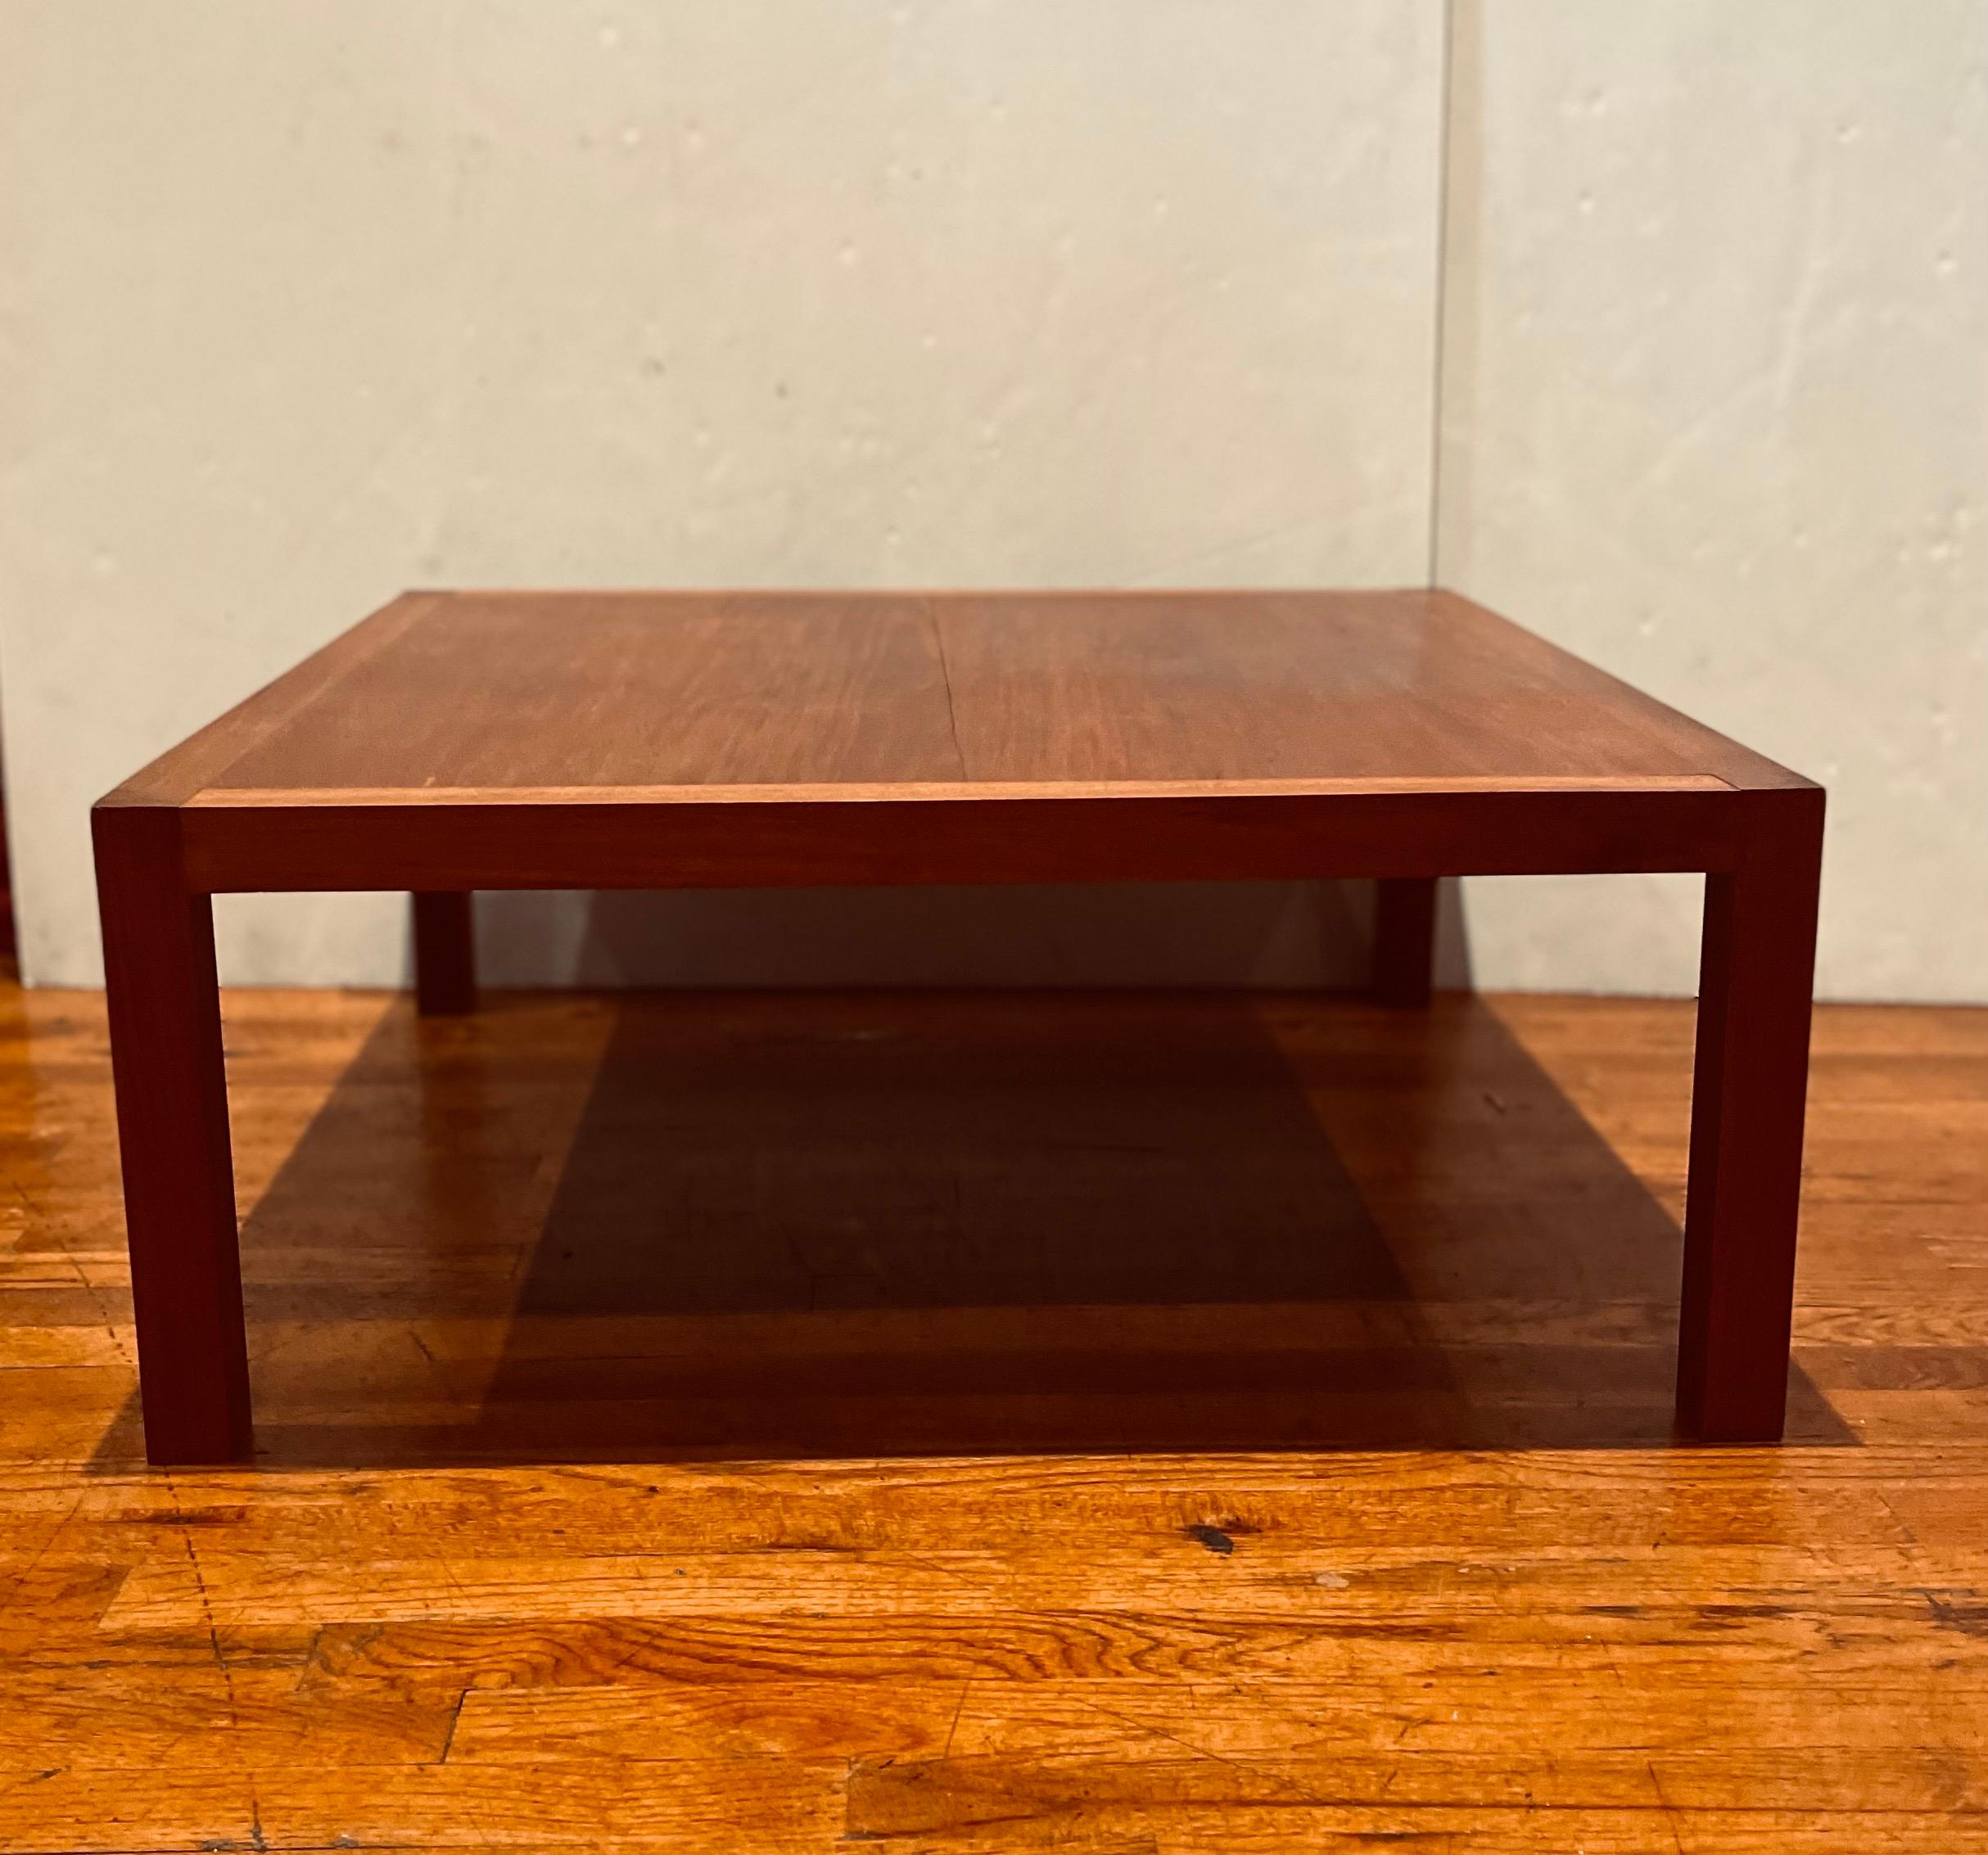 Great simple design on this beautiful solid teak square coffee table, great craftsmanship, and condition custom made solid and sturdy, one of a Kind.